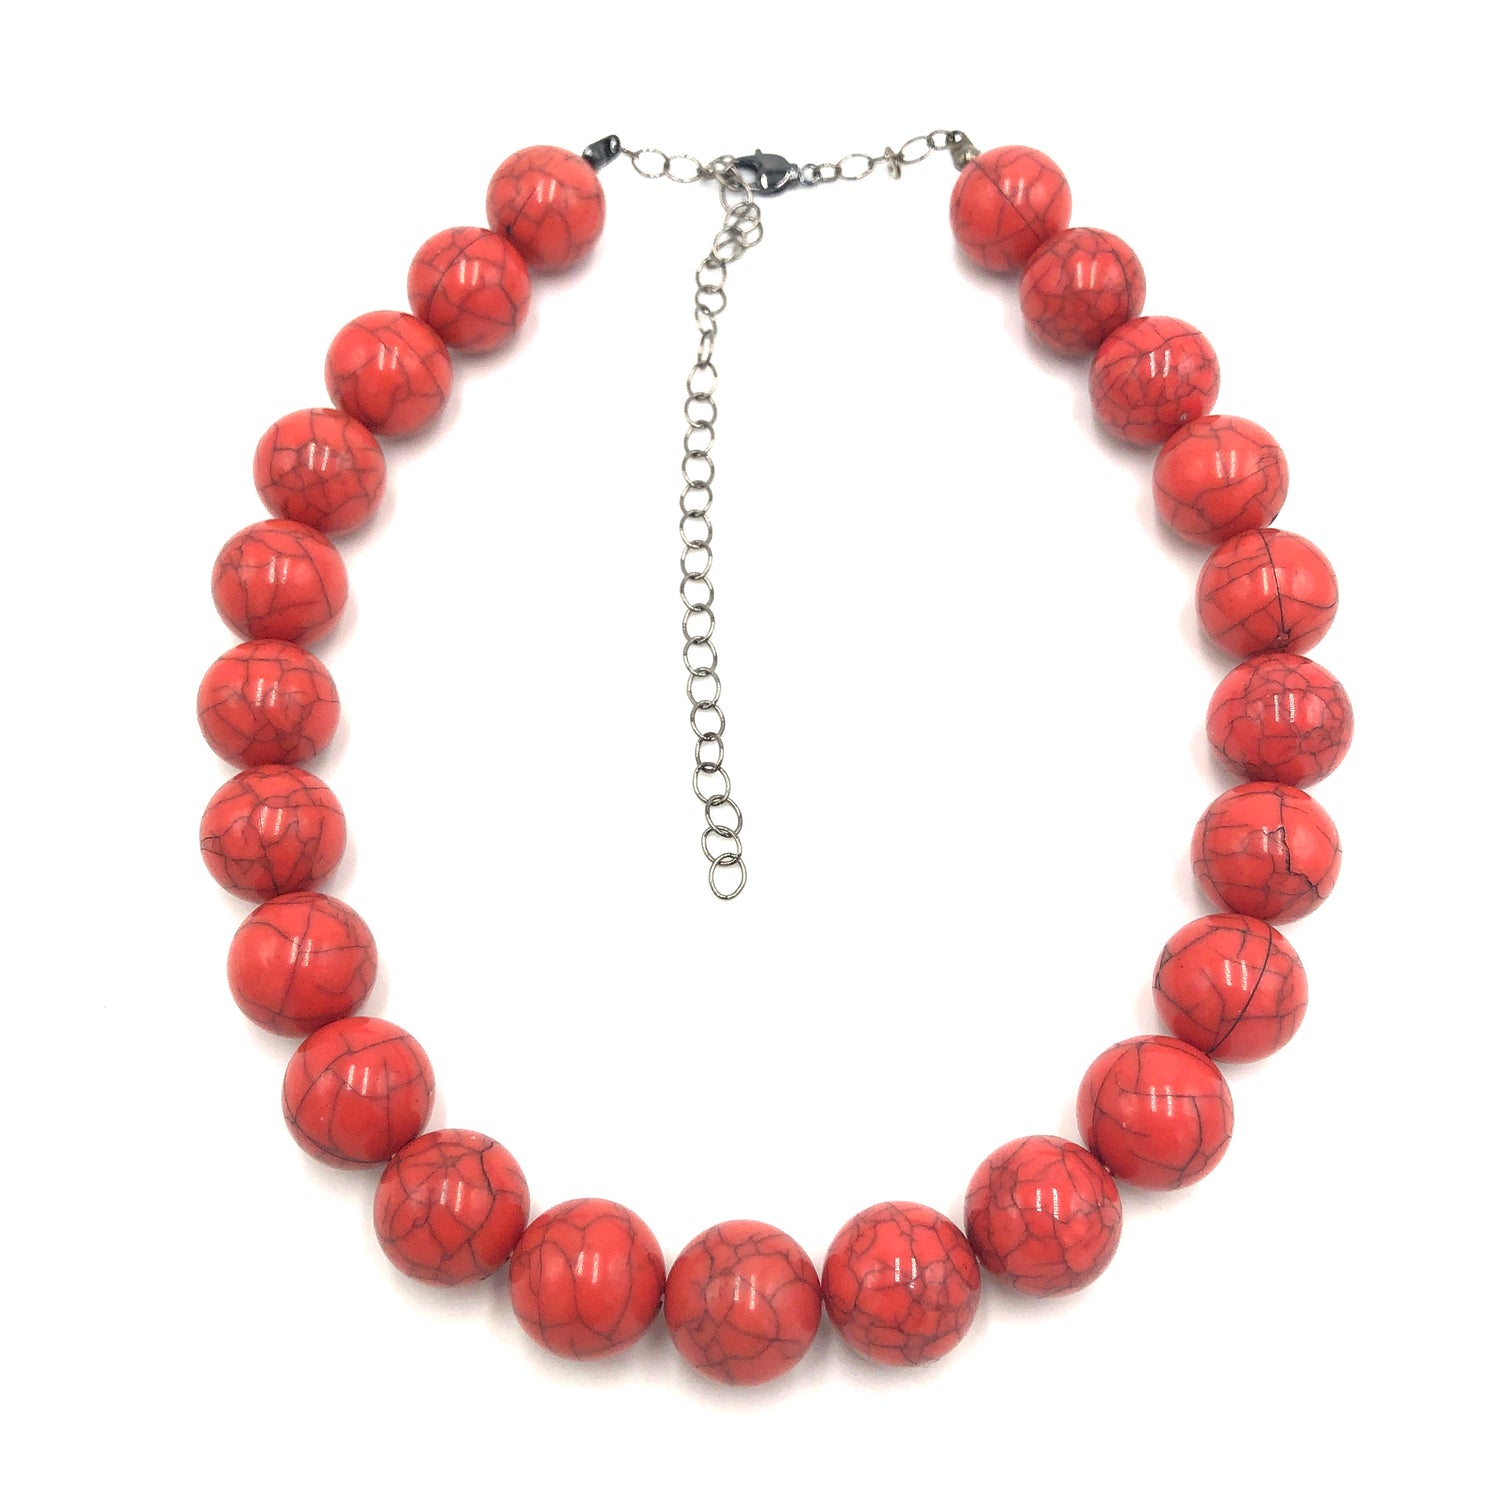 Salmon Crackle Marco Necklace